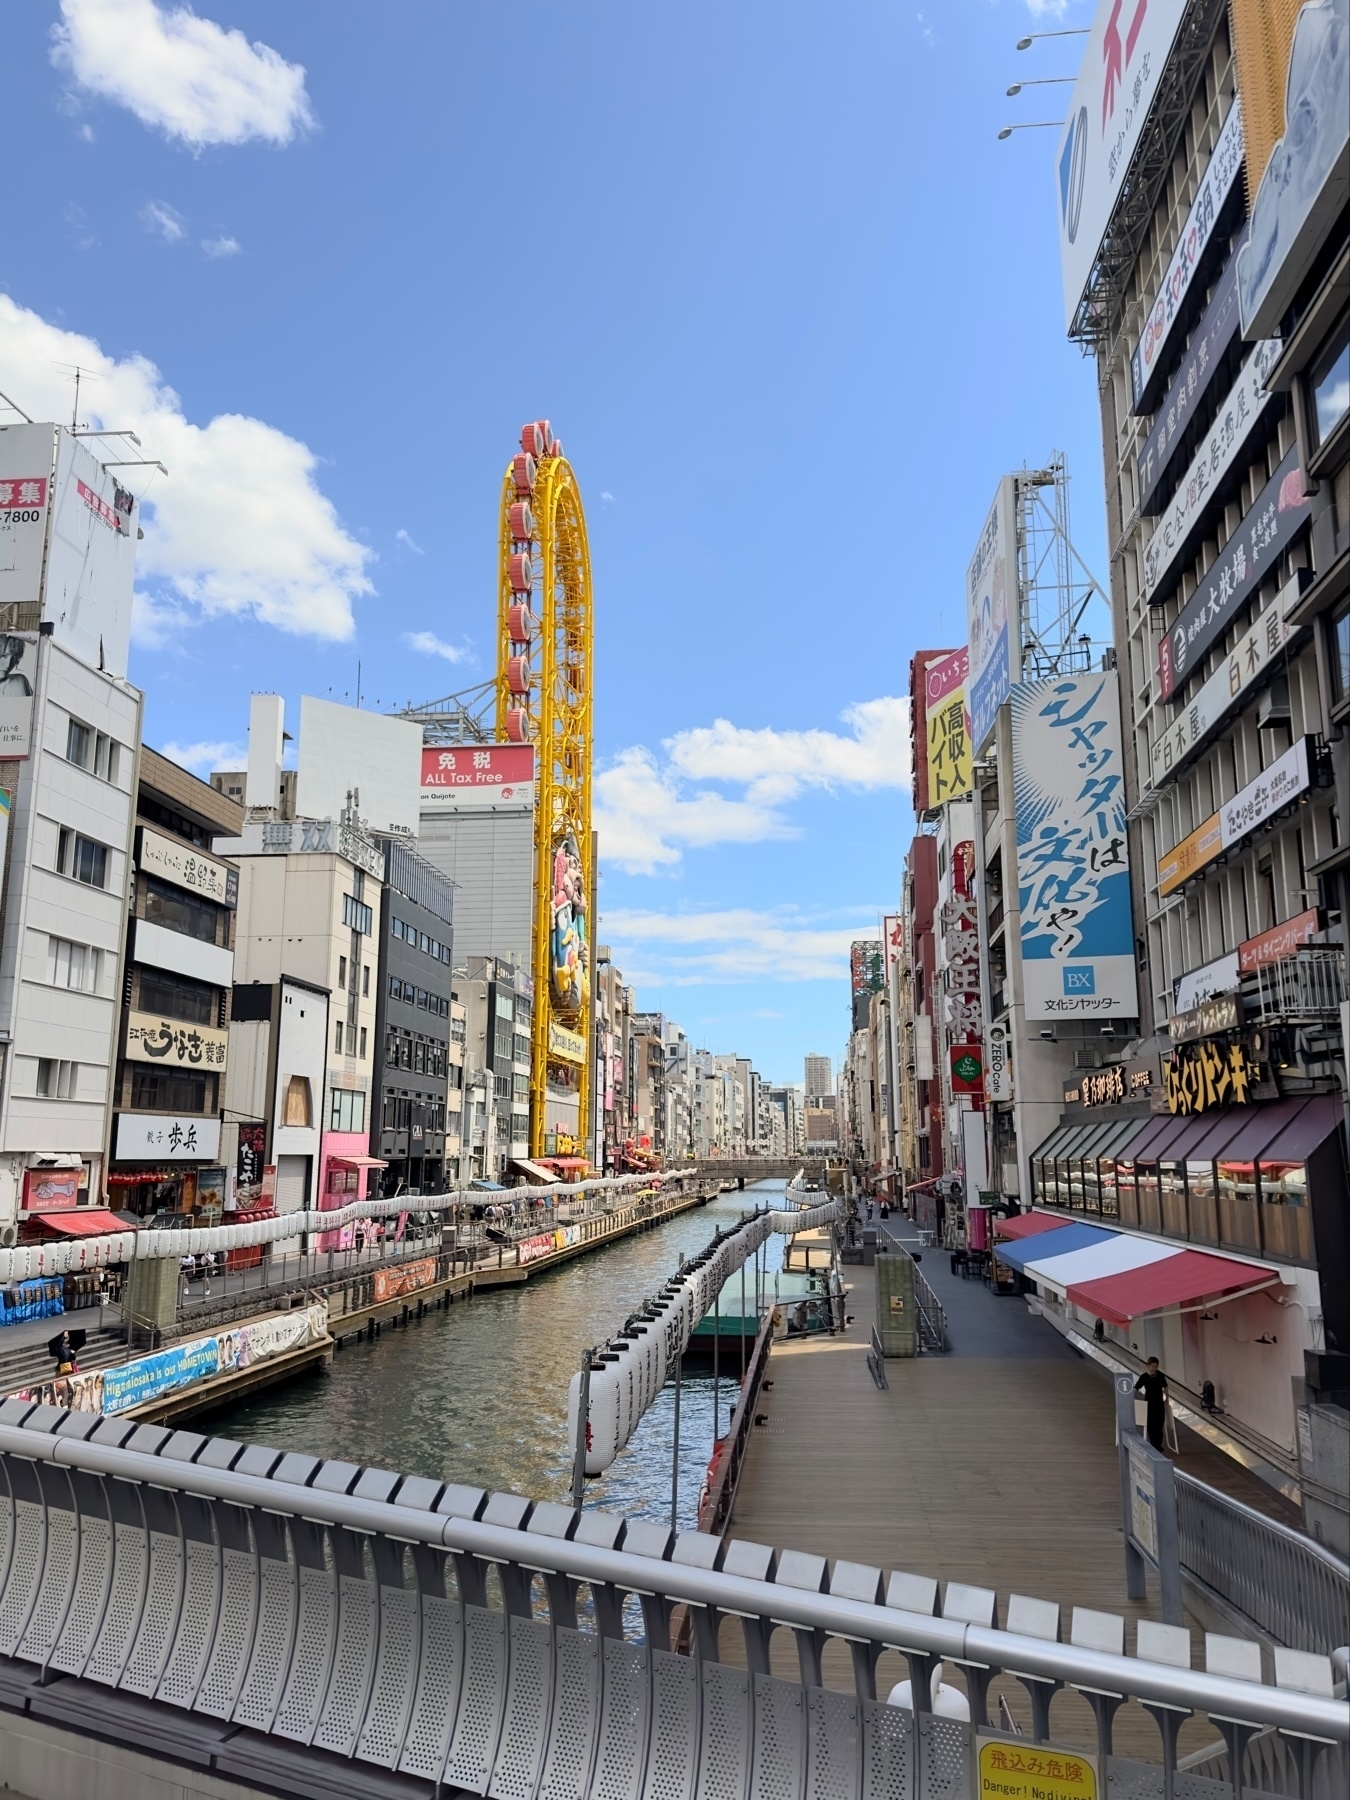 A vibrant urban street scene in Japan with a large Ferris wheel, colorful billboards, and a canal running through it, flanked by buildings and pedestrian walkways.